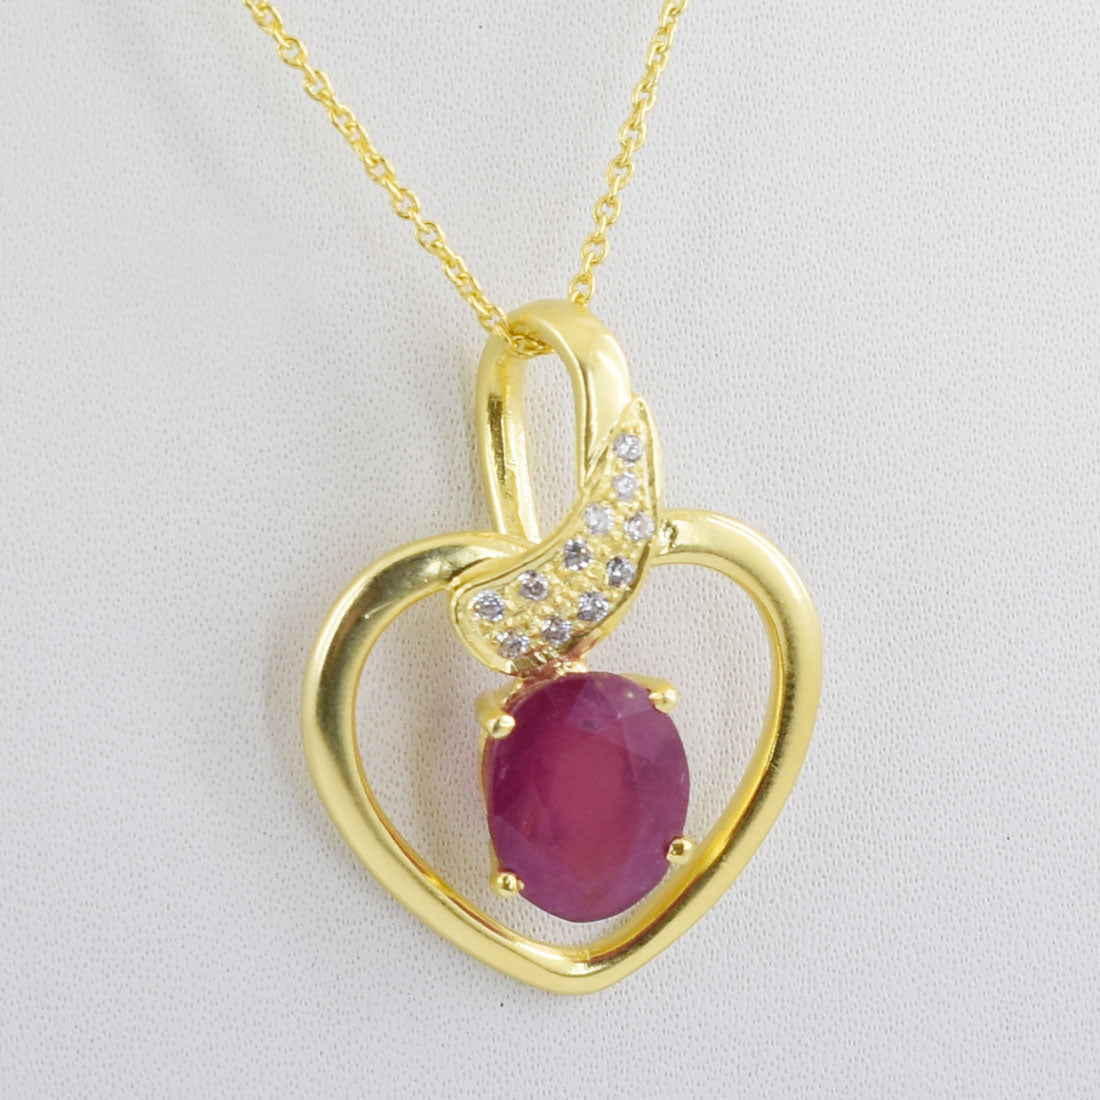 Wear Birthstone Pendant to Change Your Life